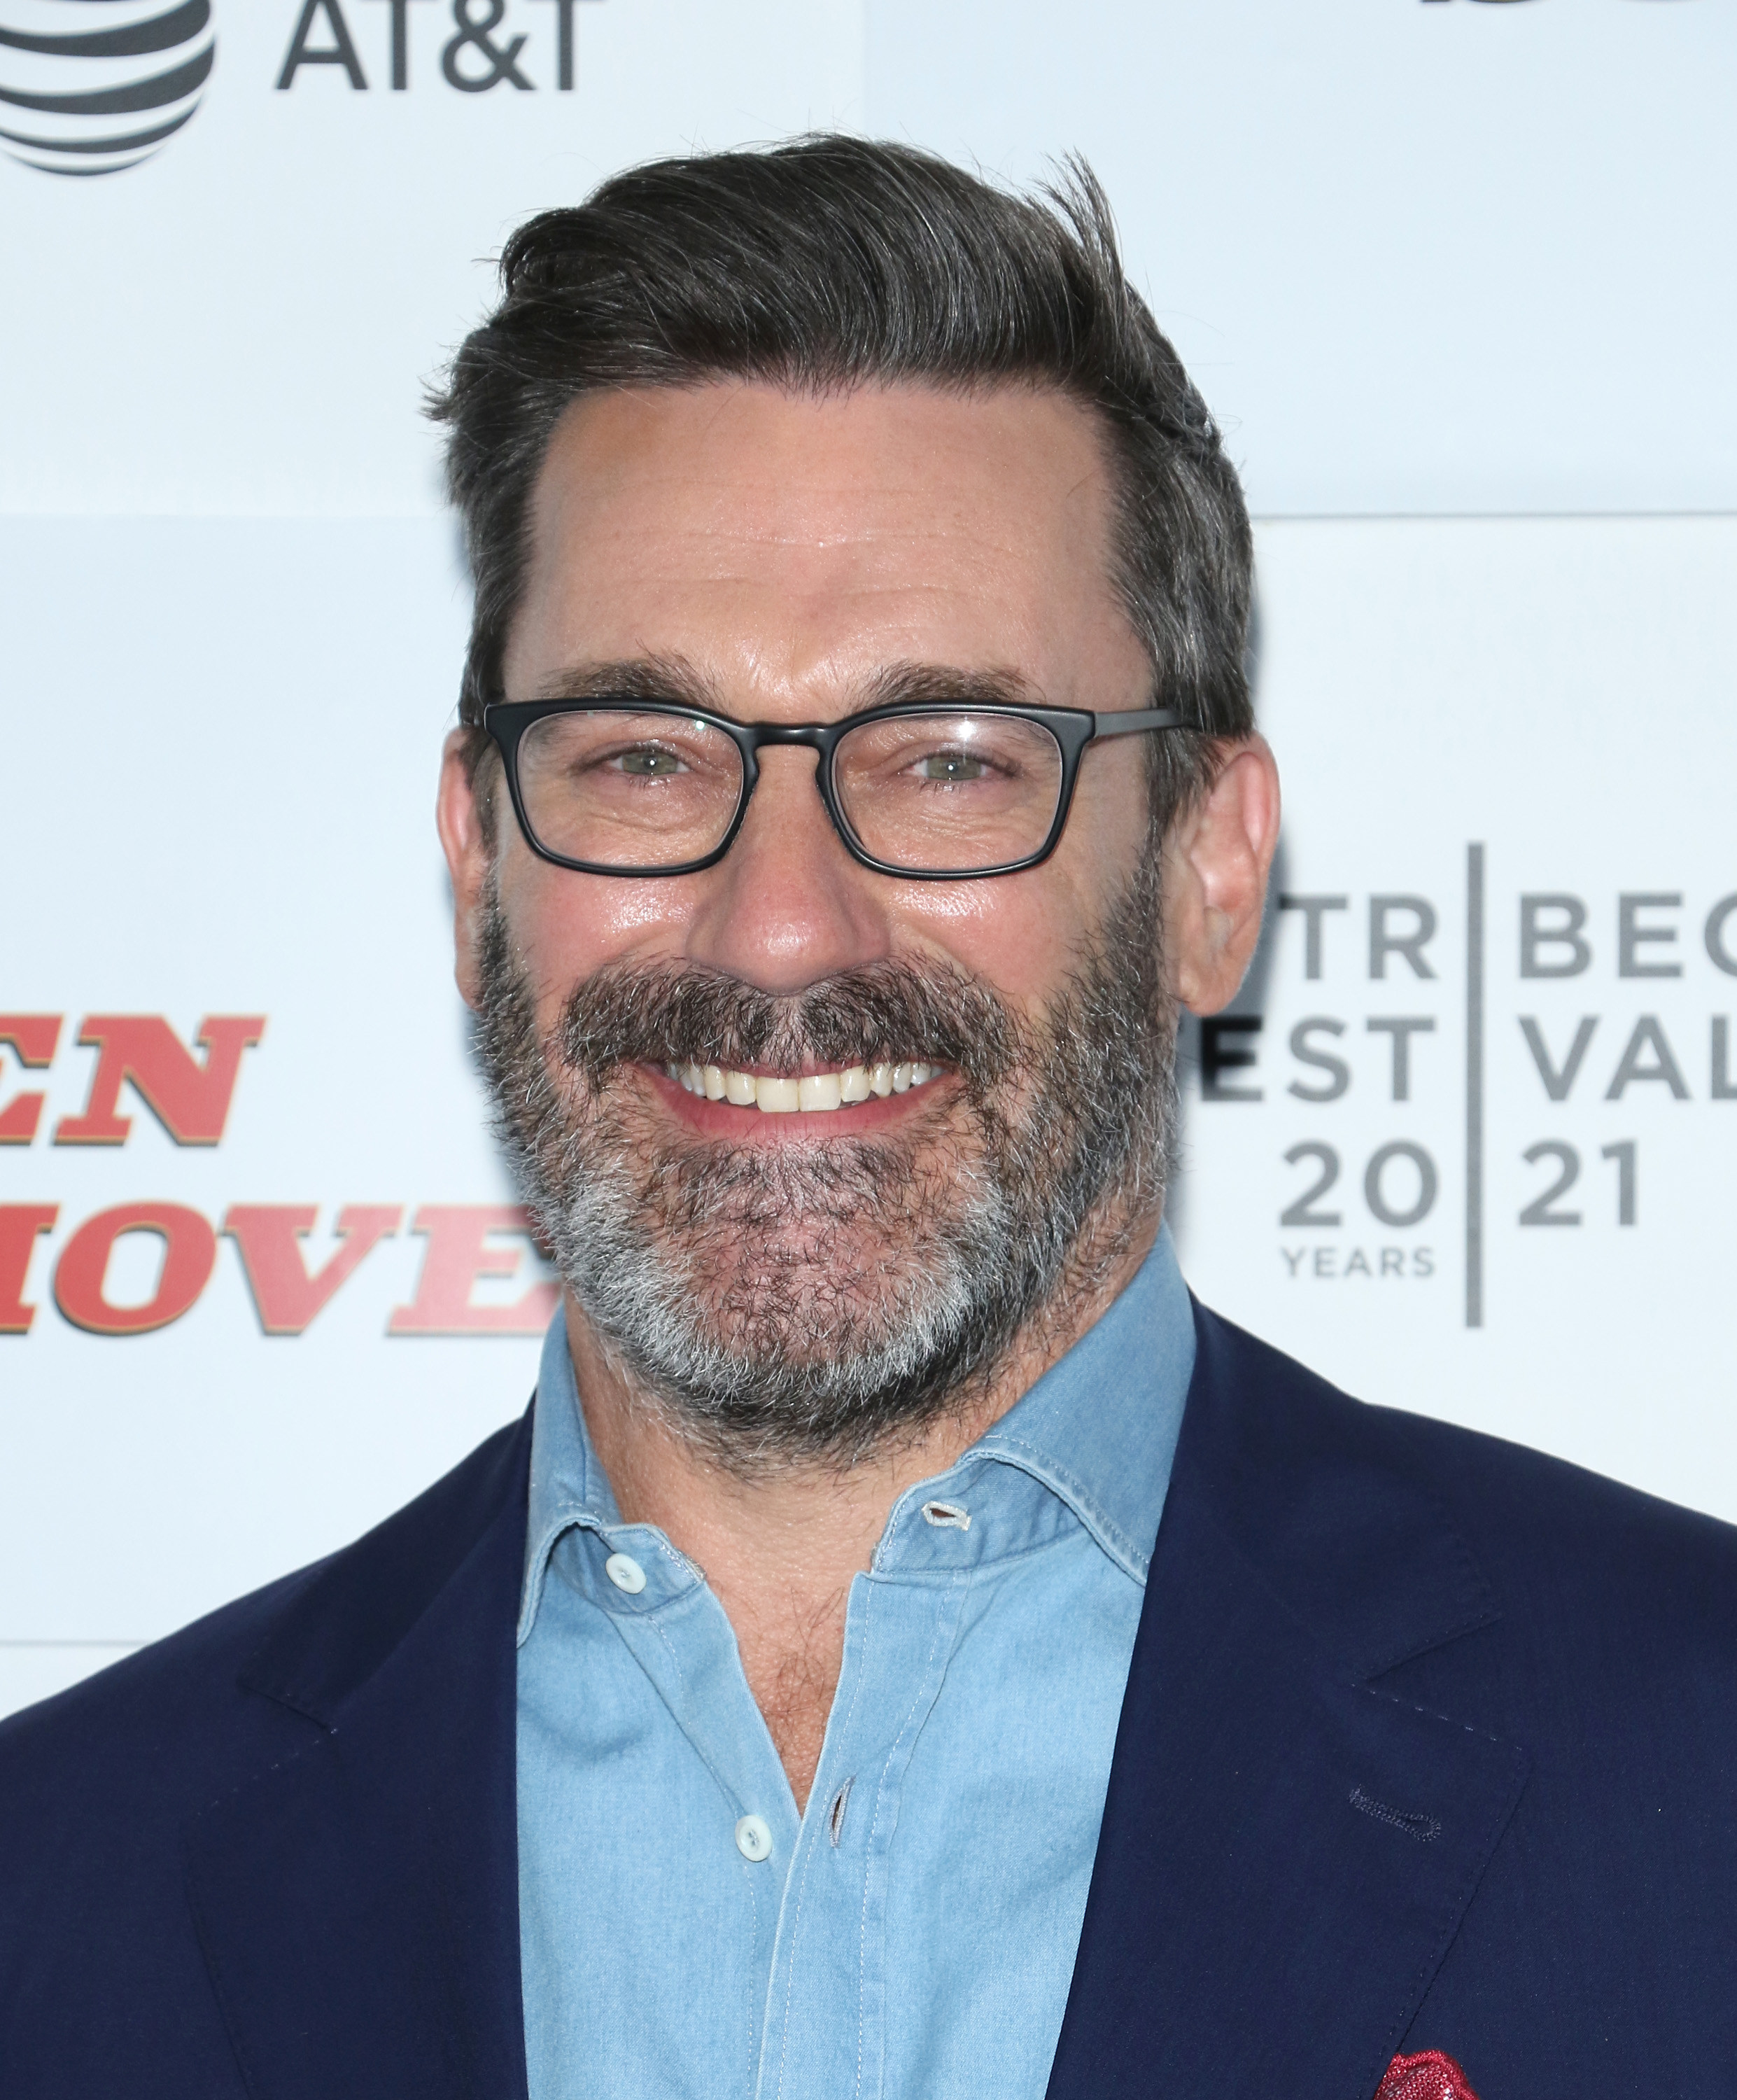 Jon Hamm at the premiere of &quot;No Sudden Move&quot; at the 2021 Tribeca Festival on June 18, 2021